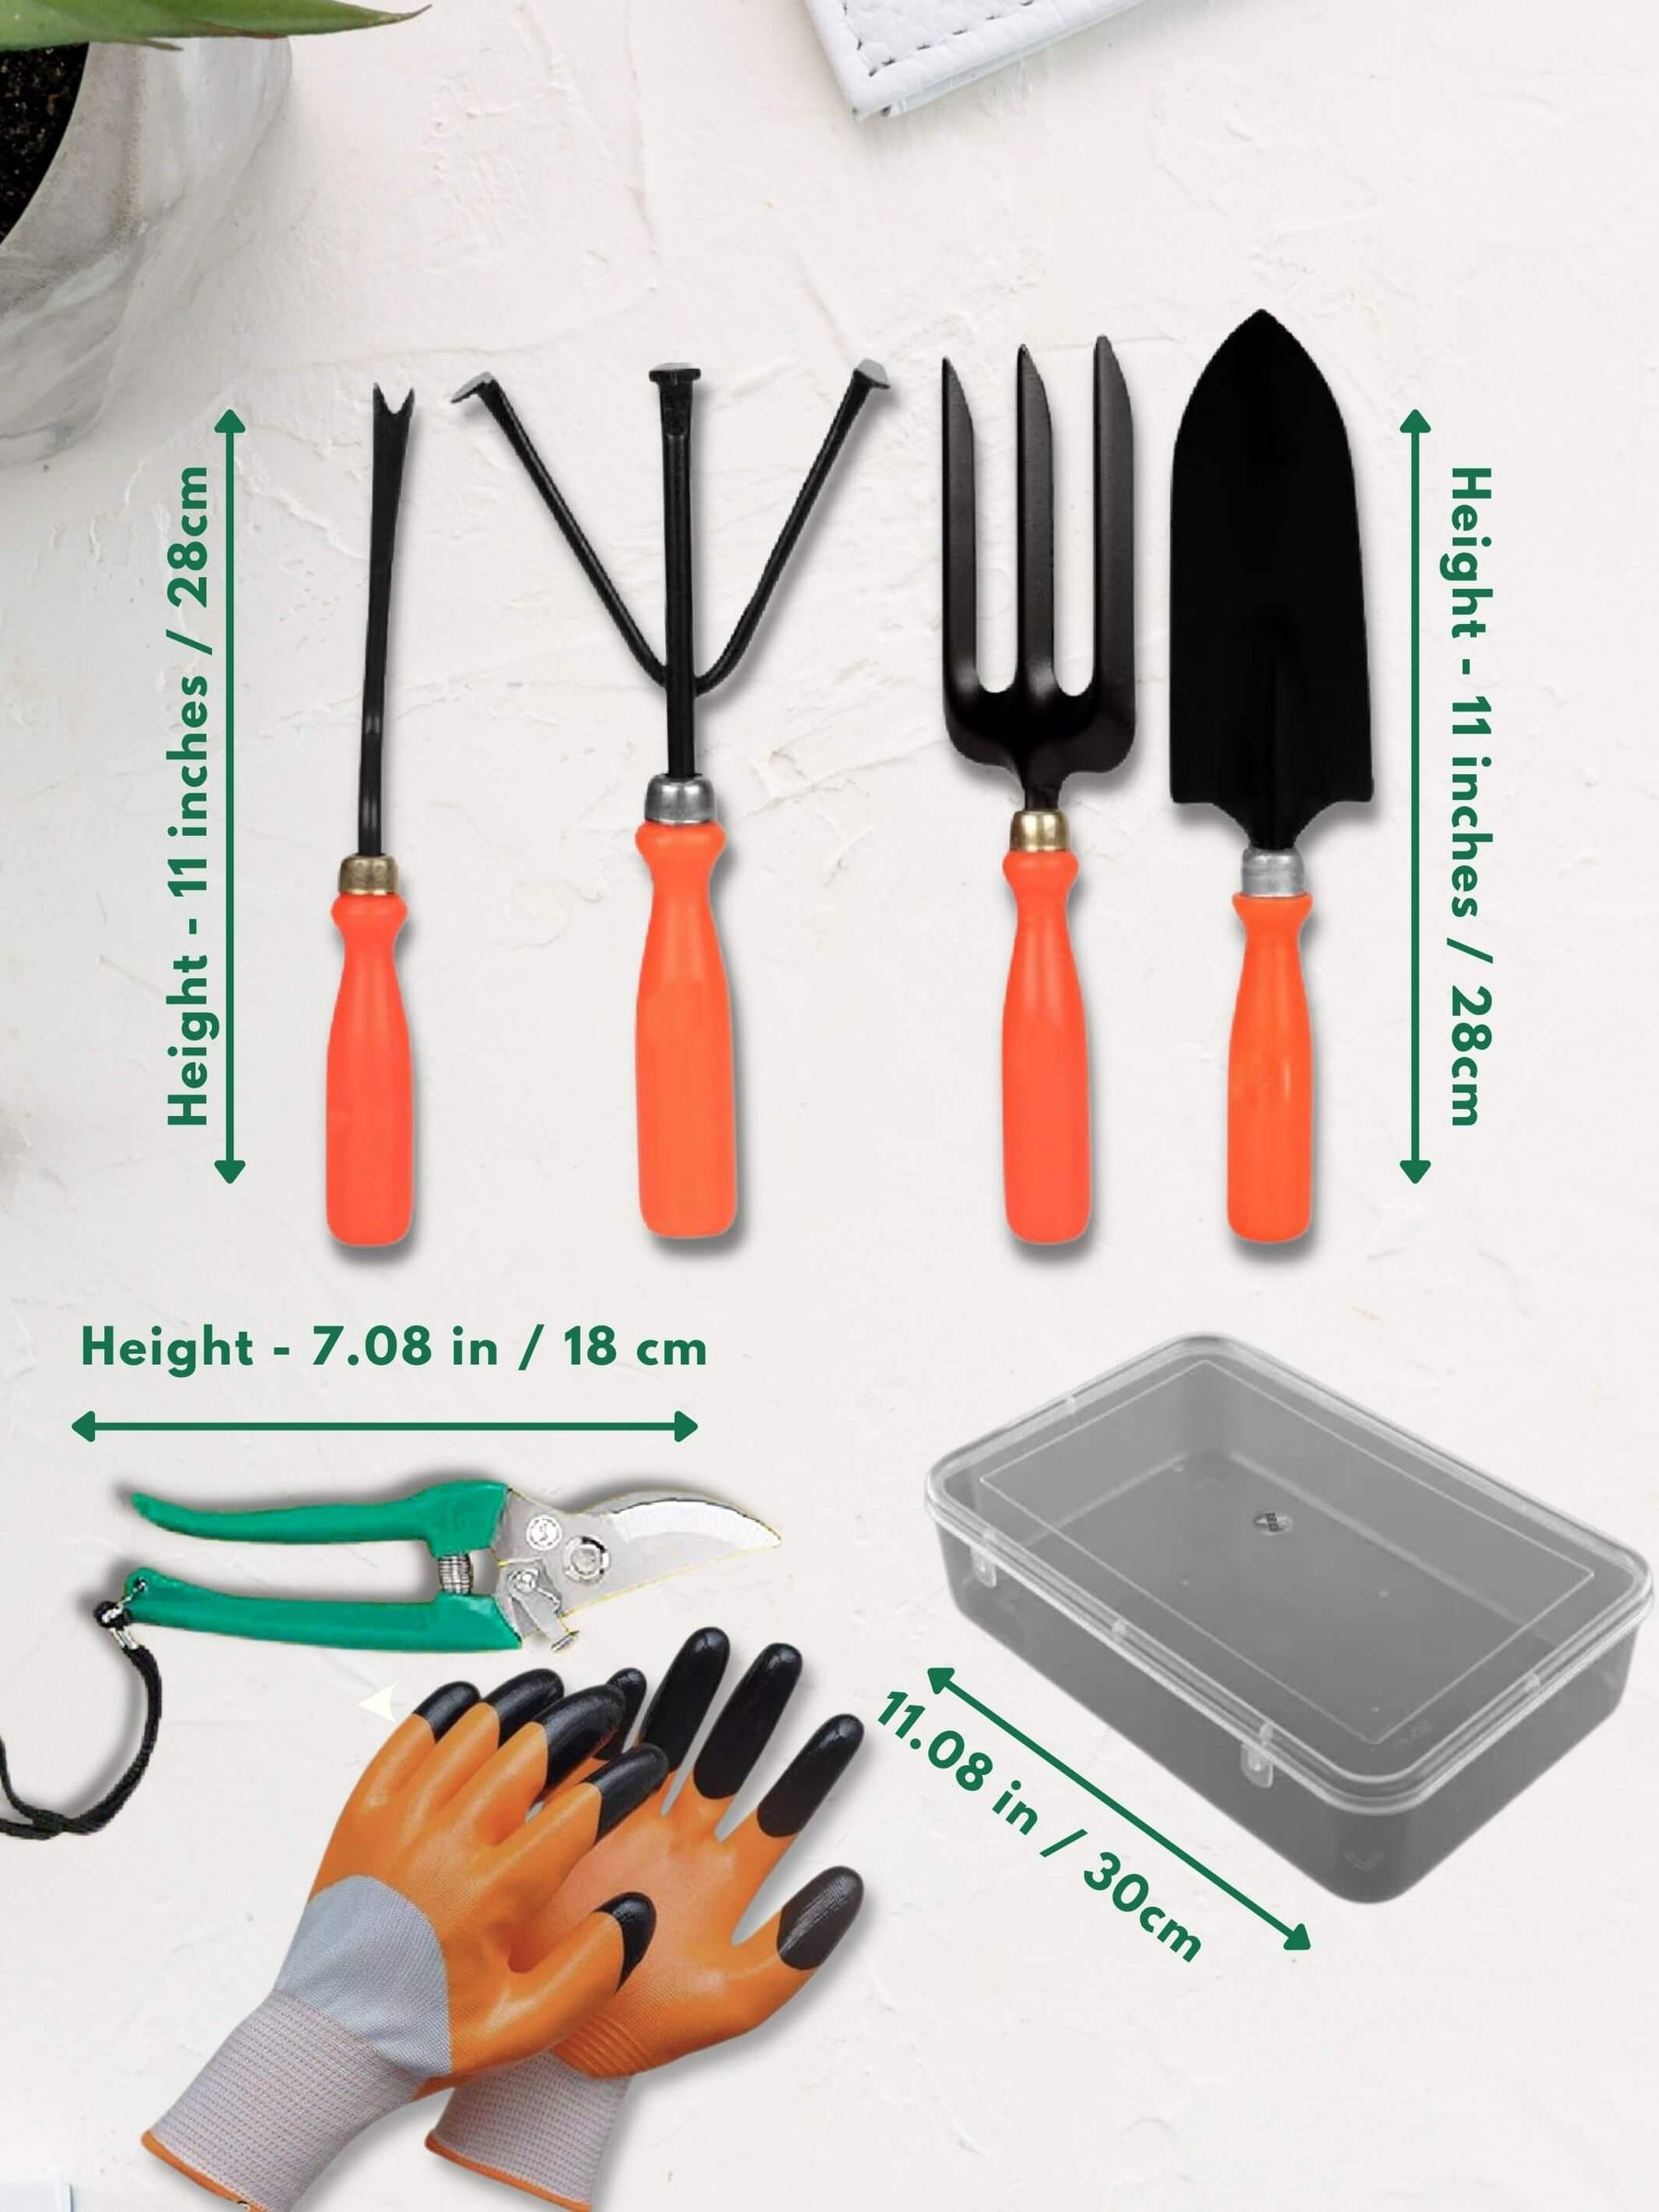 6 in 1 Gardening Tools Kit with Free Tools Box